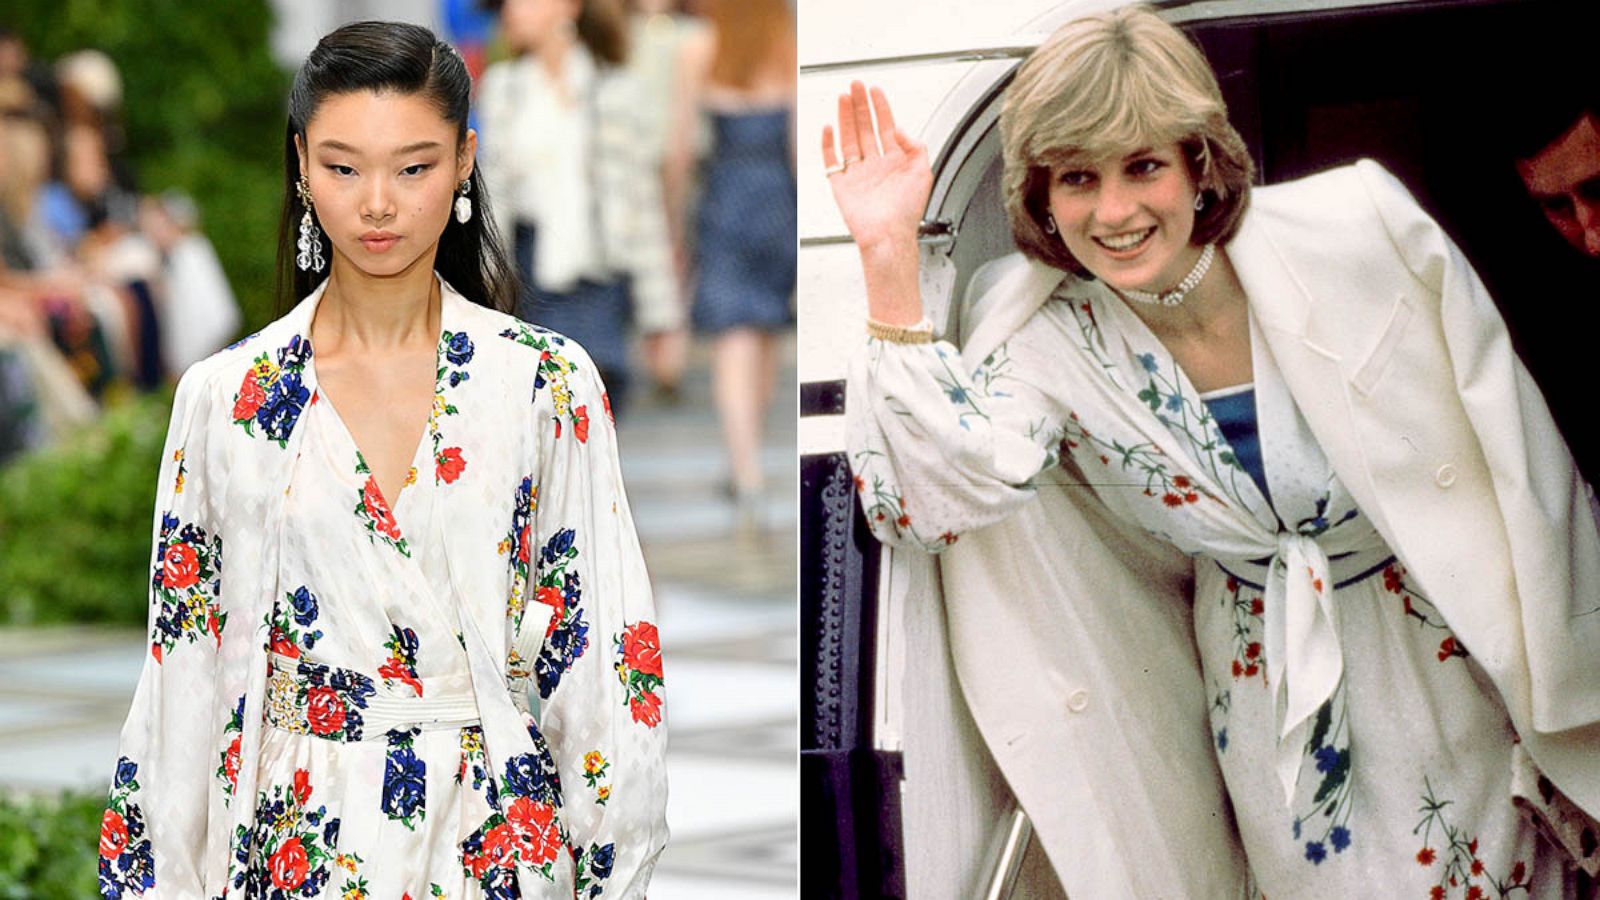 Tory Burch's latest collection was inspired by Princess Diana's '80s style  - Good Morning America